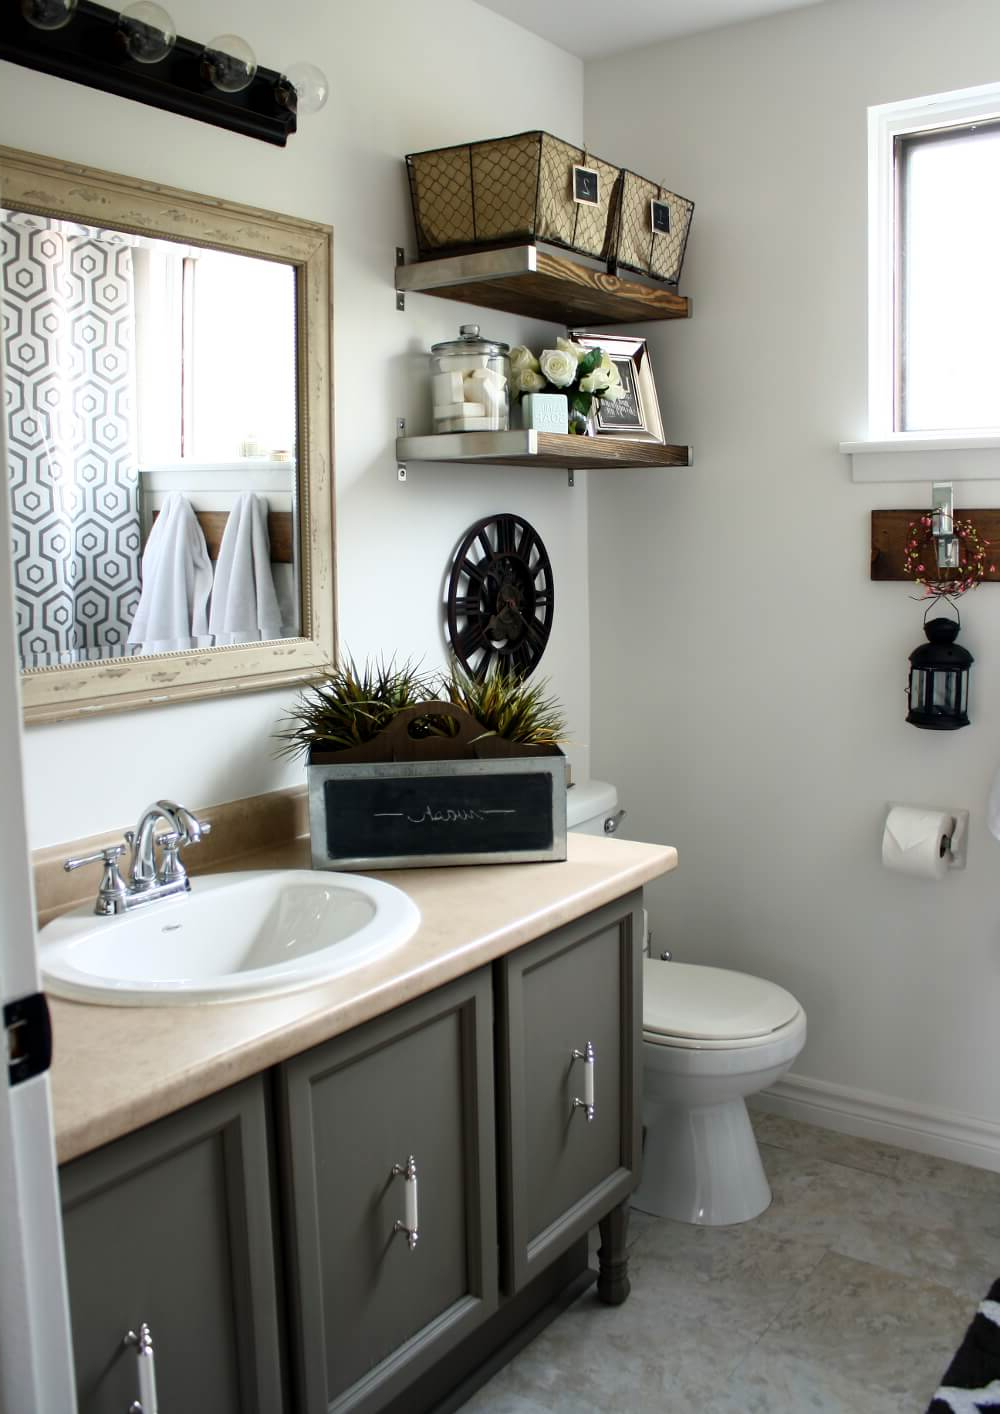 32 Best Small Bathroom Design Ideas And Decorations For 2020